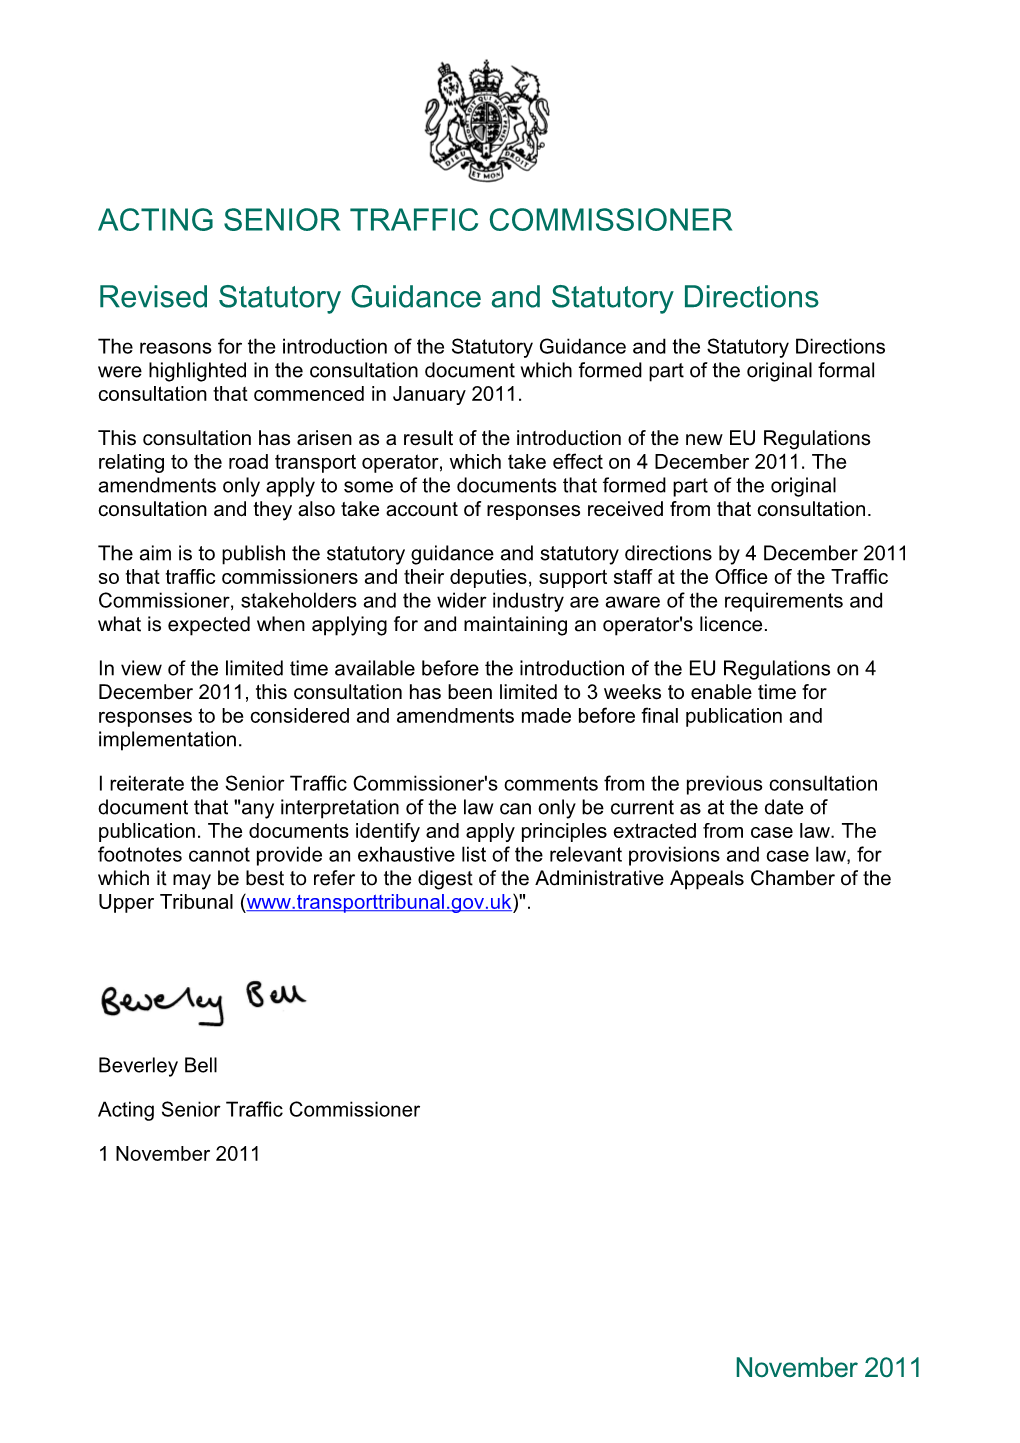 Revised Statutory Guidance and Statutory Directions